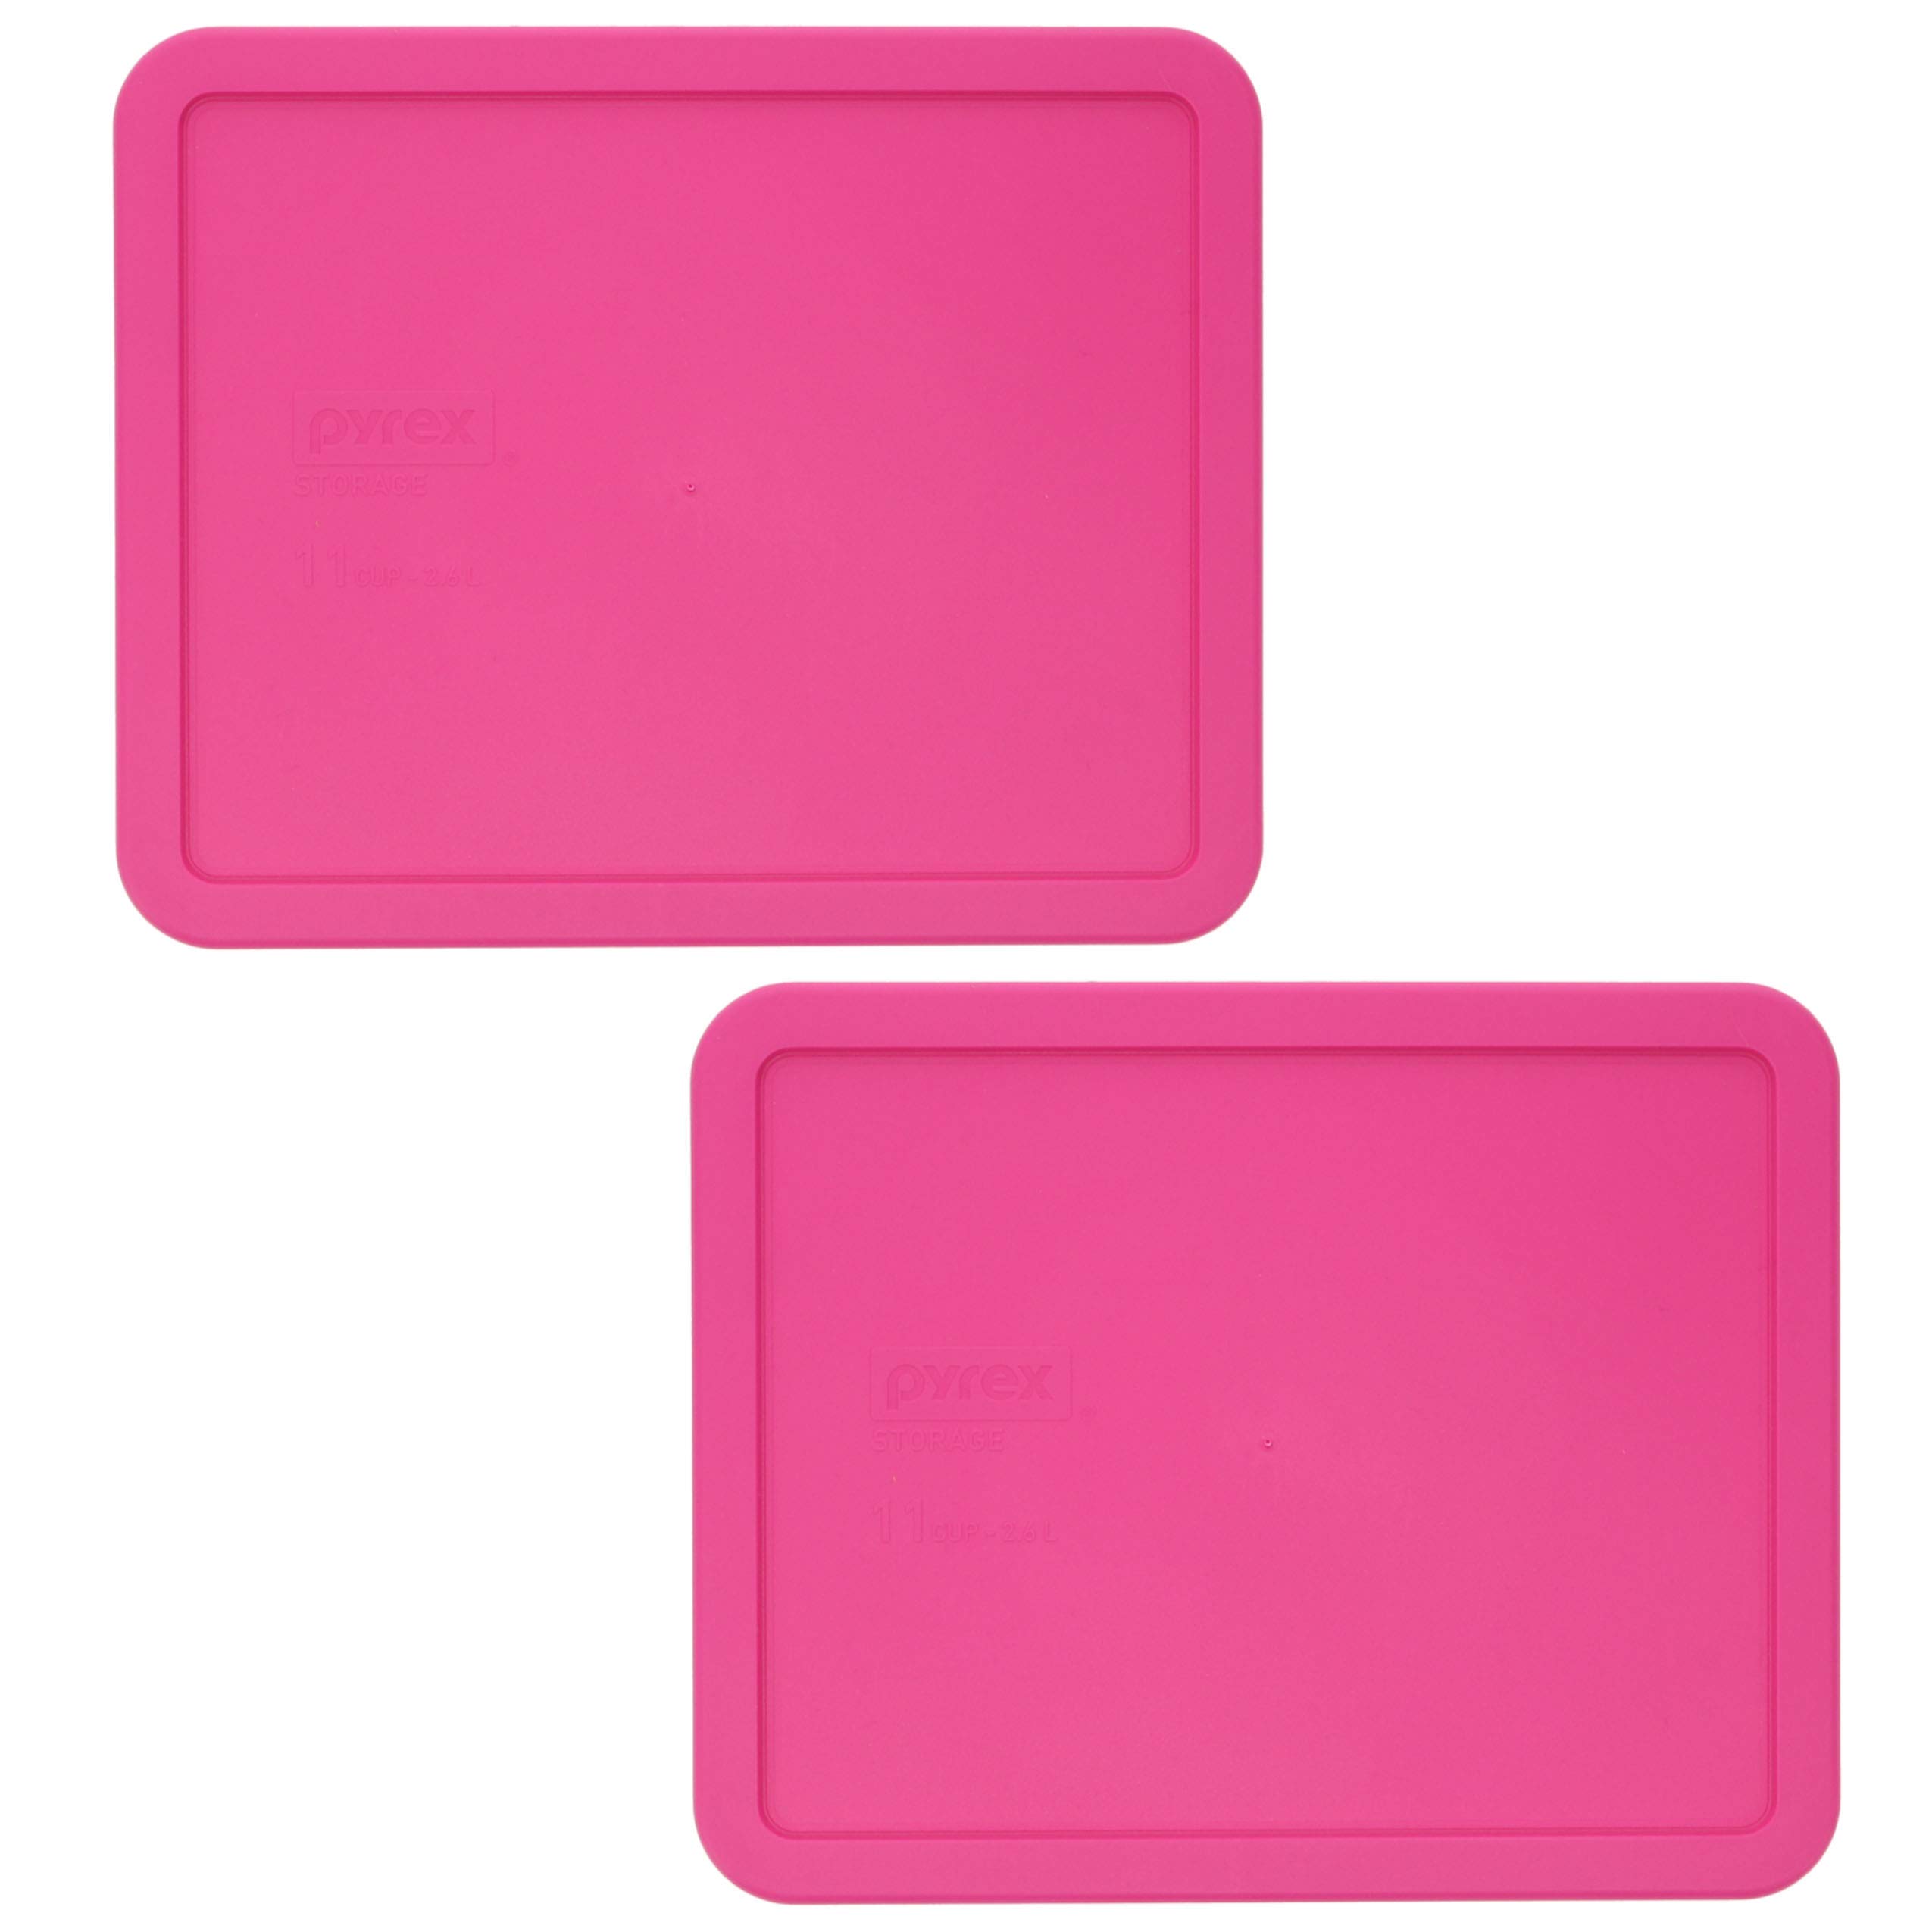 Pyrex 7212-PC Pink Plastic Rectangle Replacement Storage Lid, Made in USA - 2 Pack